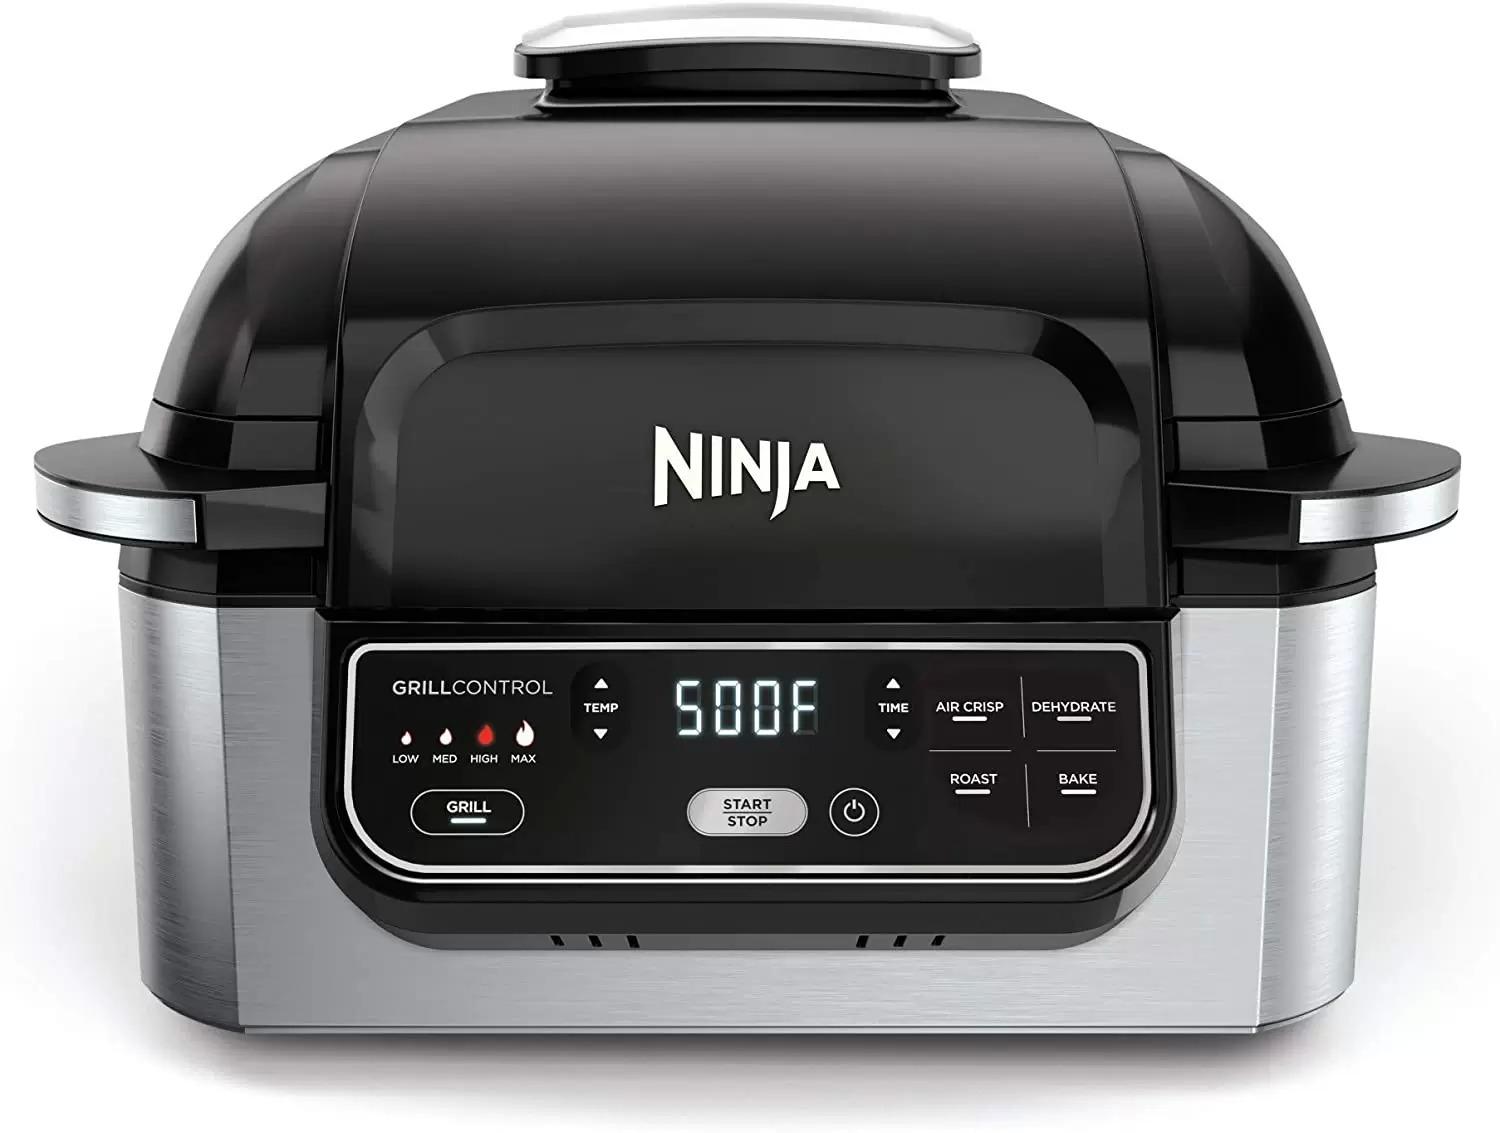 Ninja Foodi 5-in-1 Indoor Grill with Air Fryer + $30 Cash for $169.99 Shipped